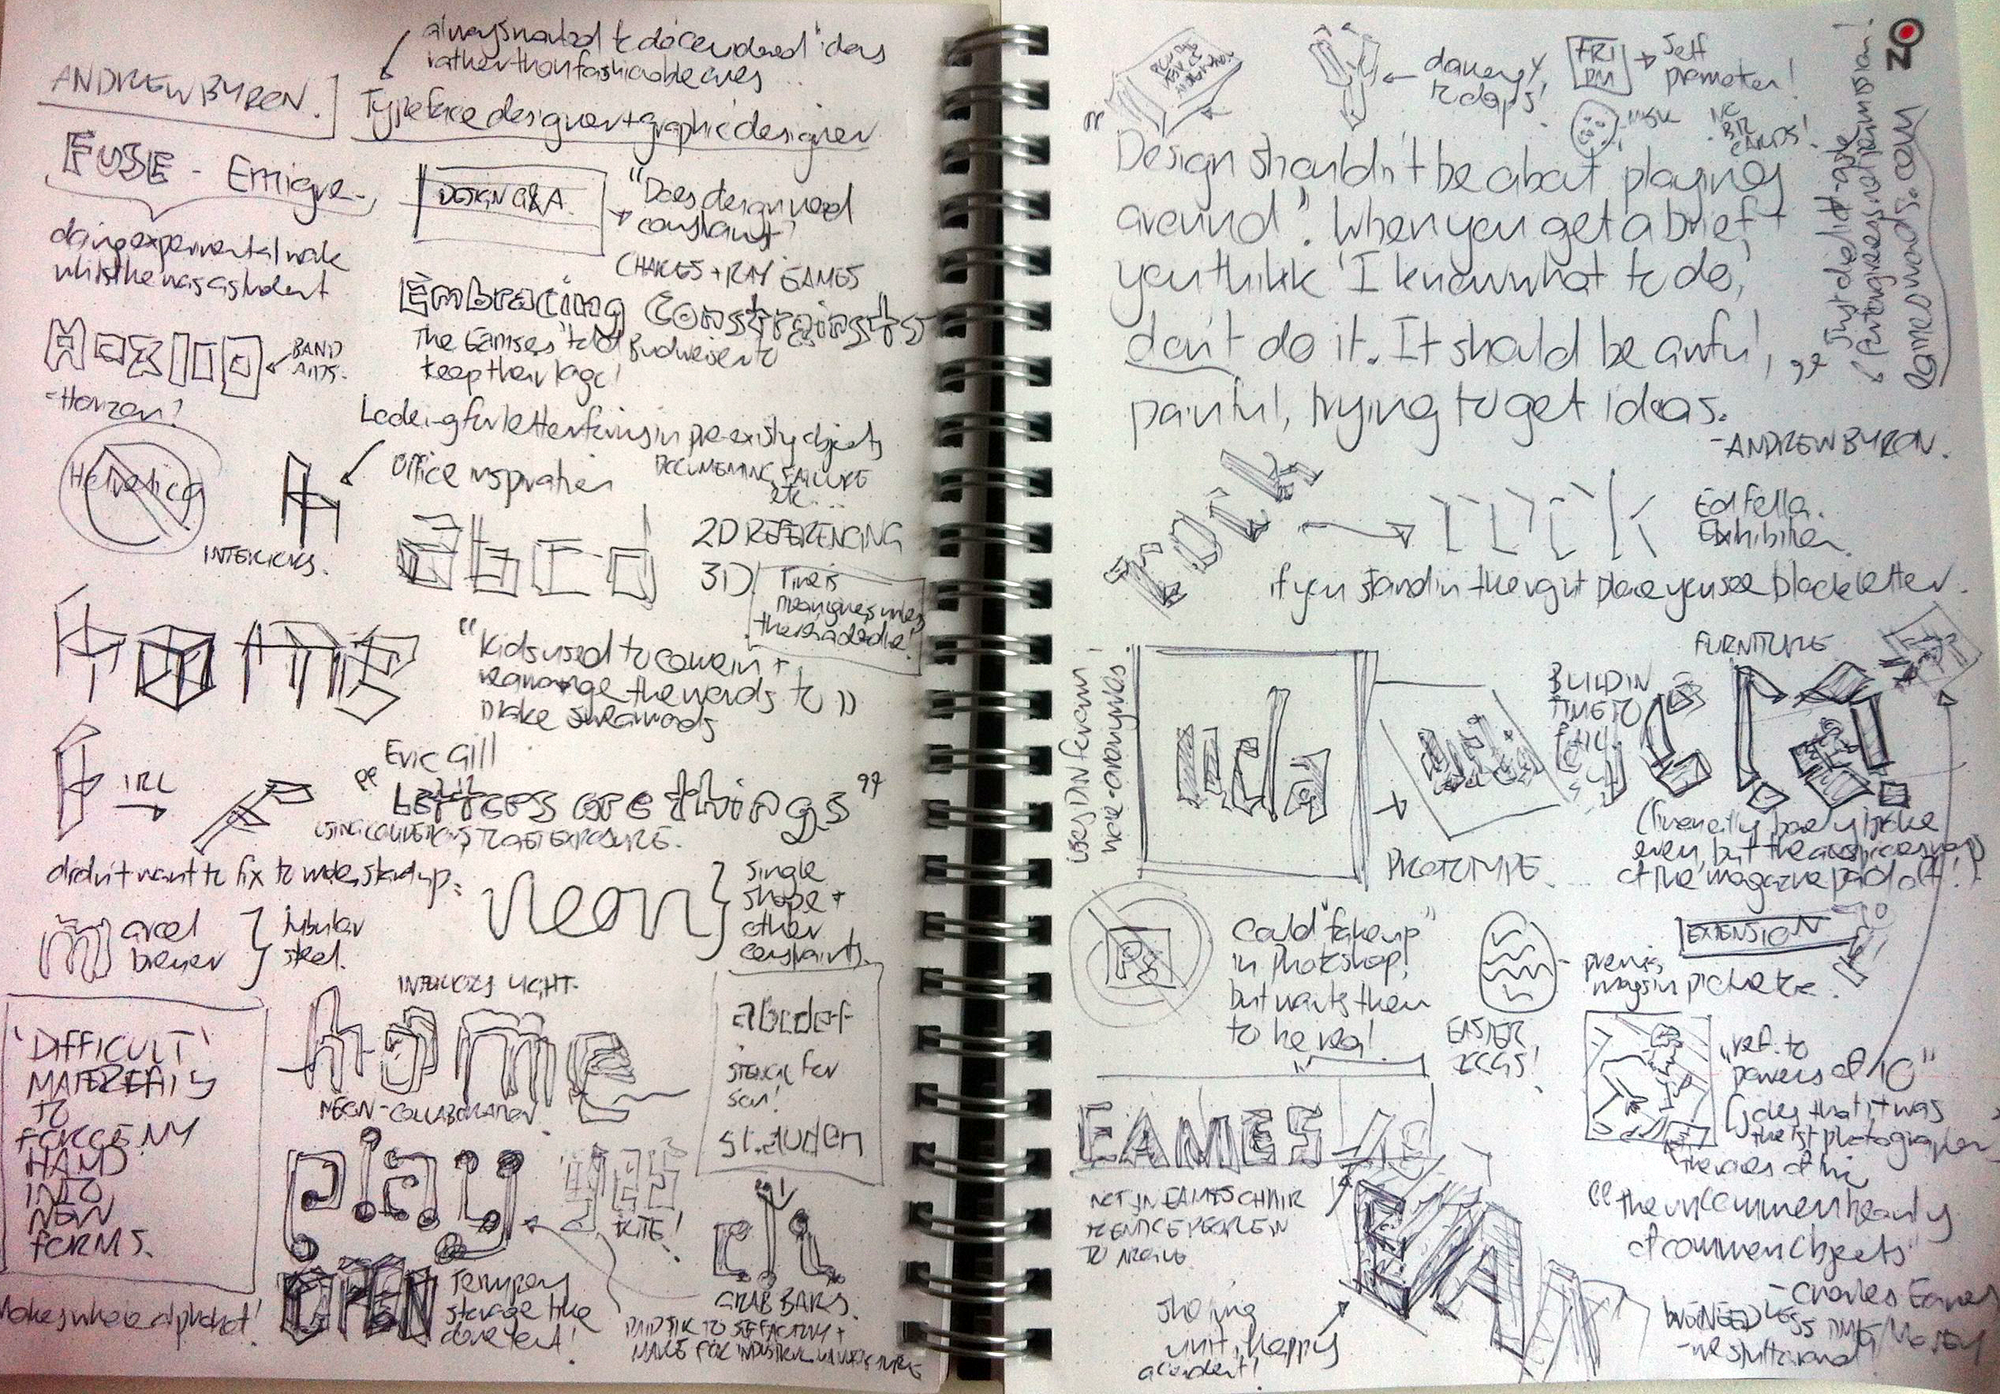 Sketch notes of Andrew Byrom